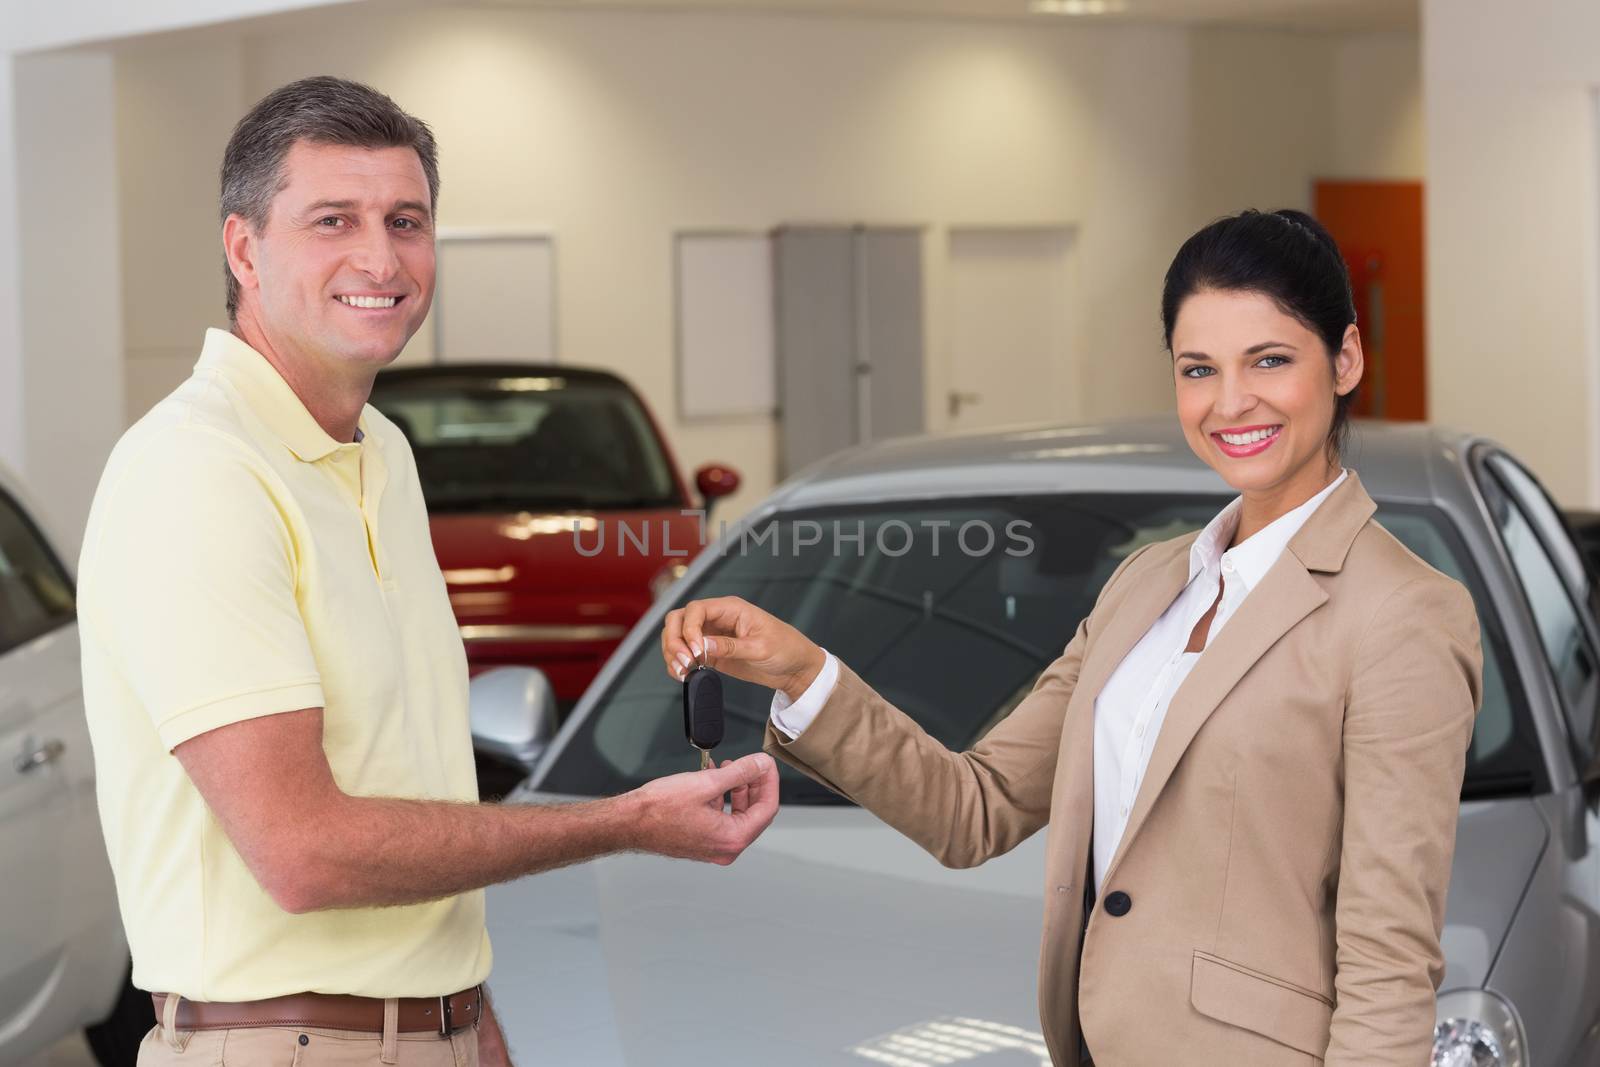 Smiling businesswoman giving car key to happy customer at new car showroom